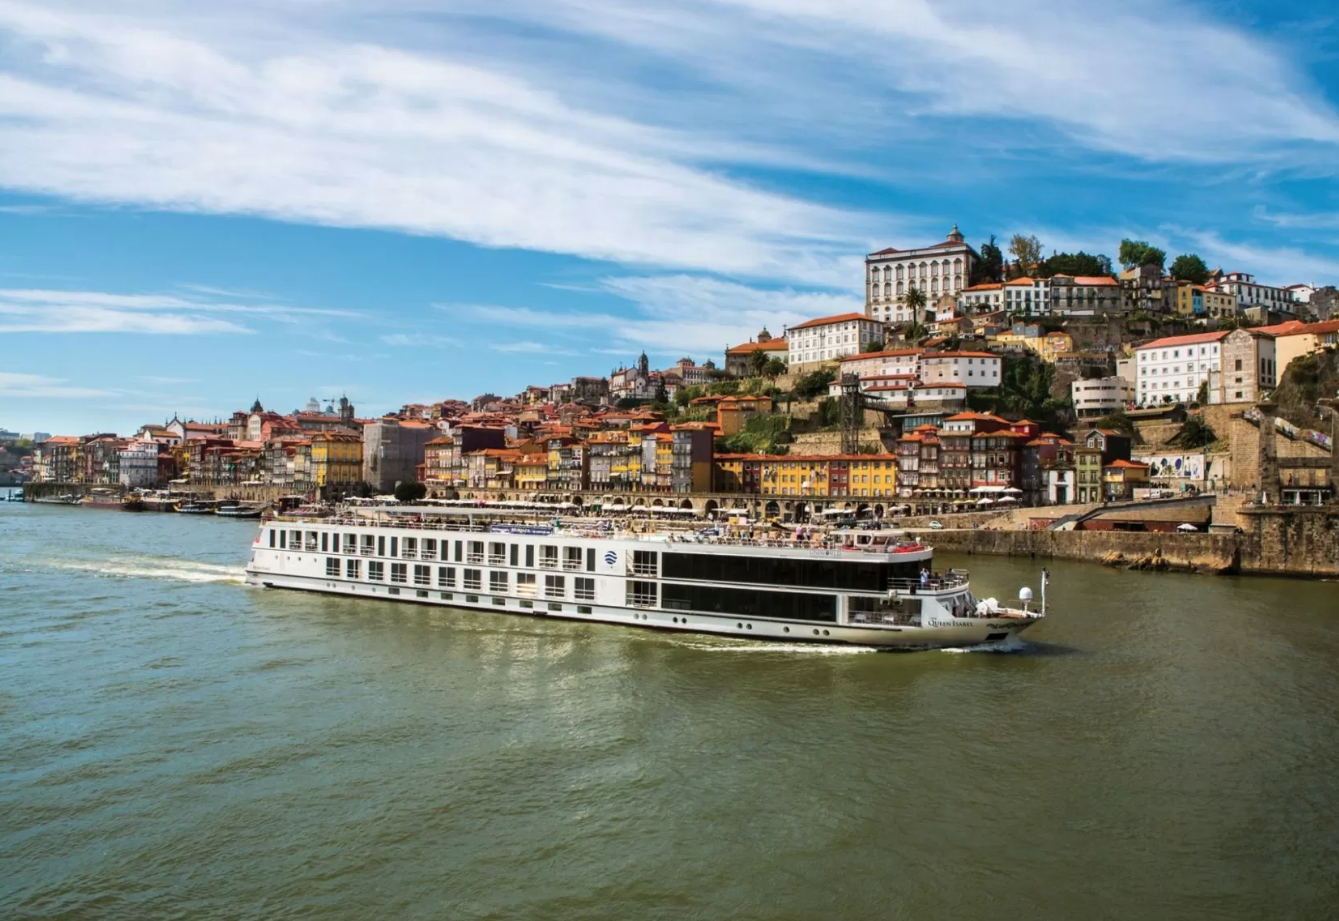 Queen Isabel on the Douro